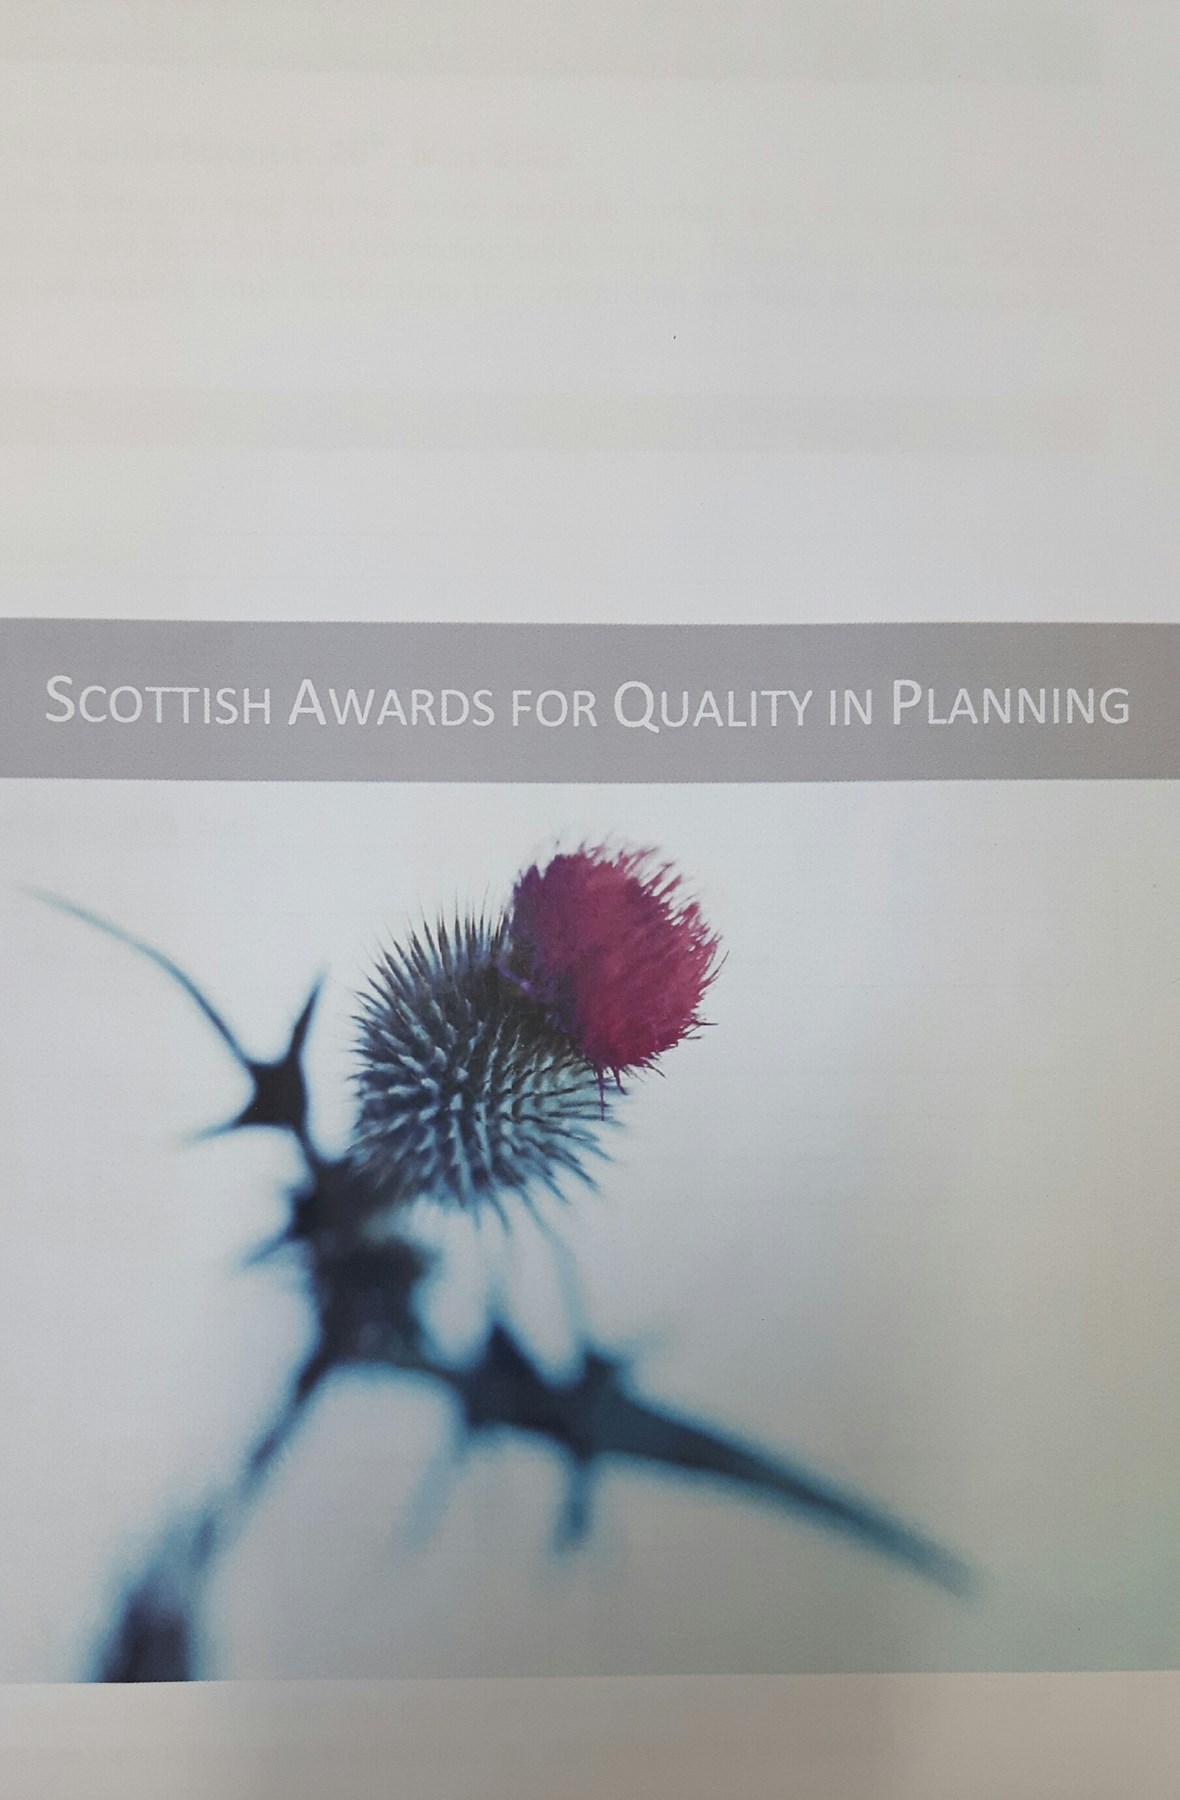 Moray Council have been shortlisted for two national planning awards.